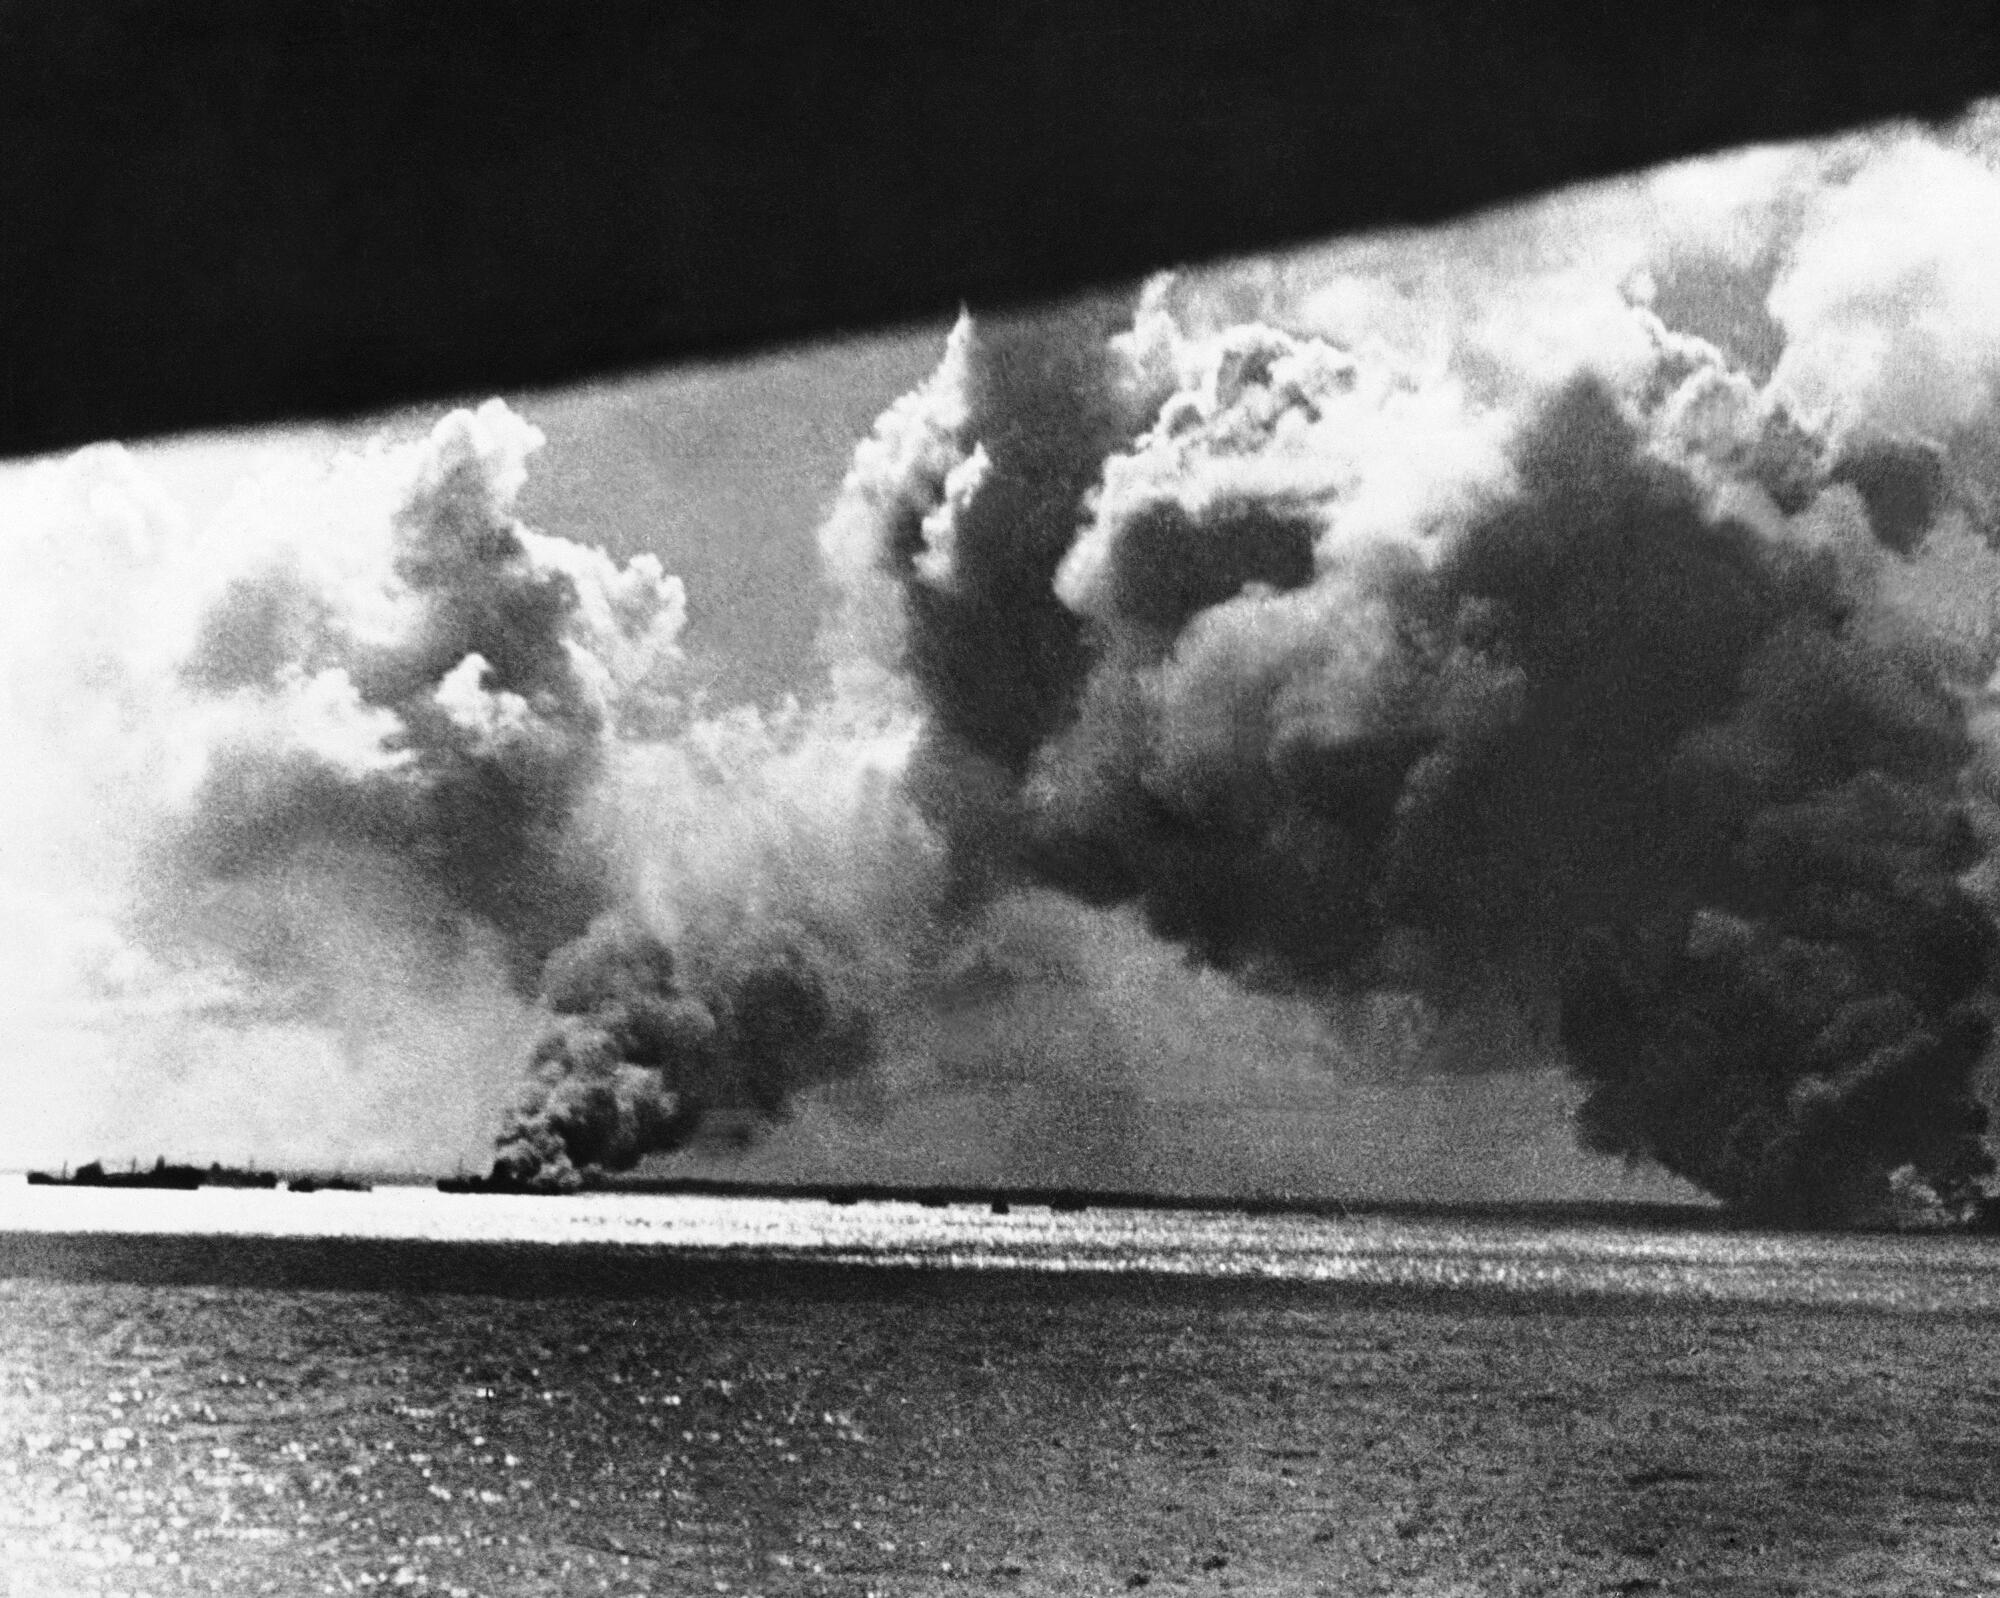 Smoke billowing from Darwin, Australia, after Japanese aerial attack in 1942